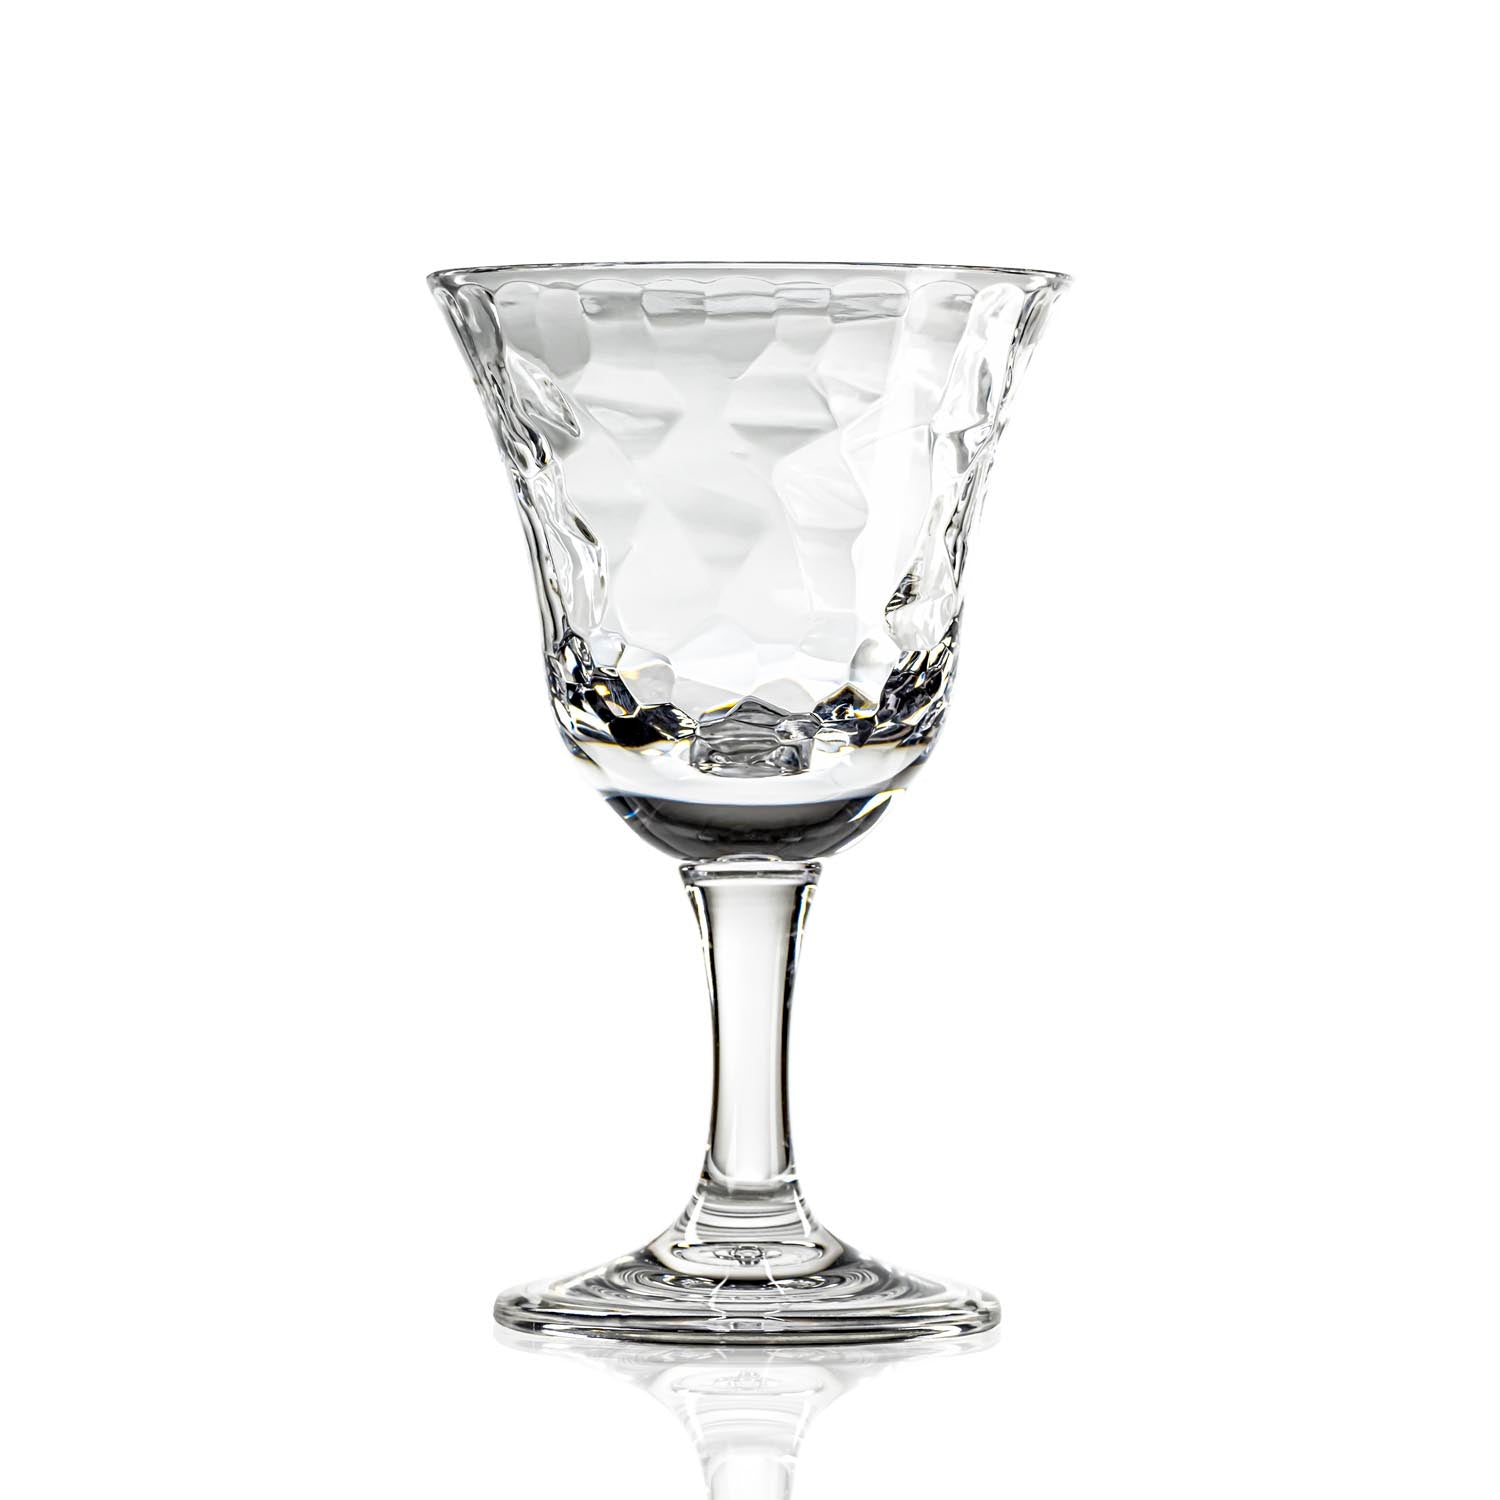 12-ounce clear acrylic wine glass from the Merritt Designs Cascade collection. Front view on white background